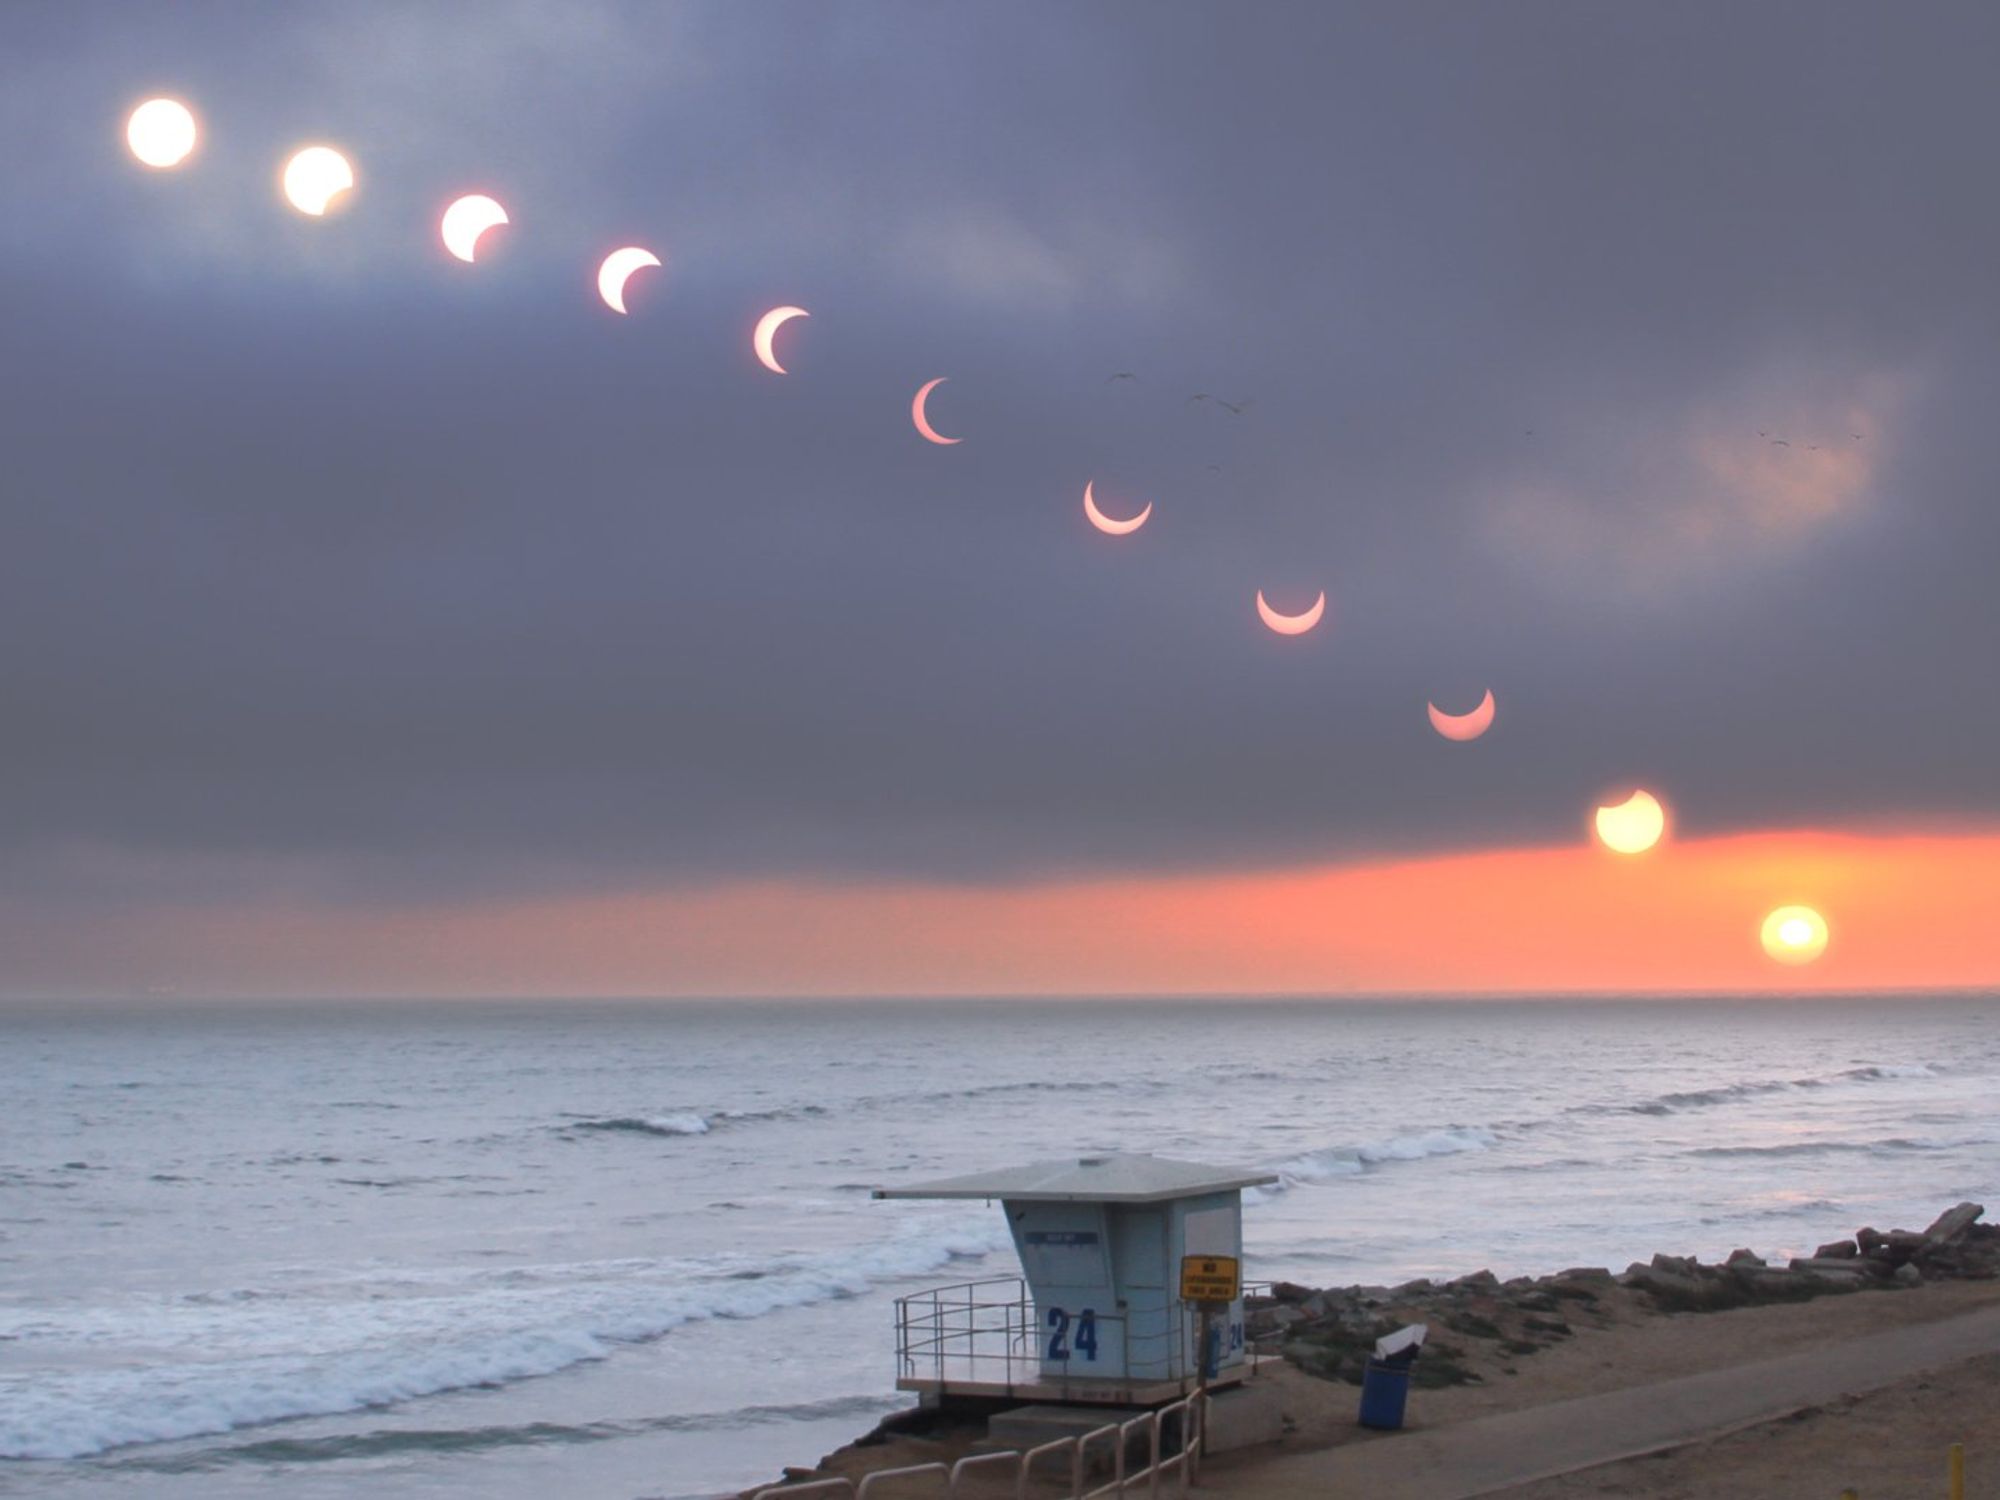 May 20 2012 Solar Eclipse near Sunset Beach / Huntington Beach, CA - timelapse / composition of "phases" of the eclipse during the approximate 2 hour duration.